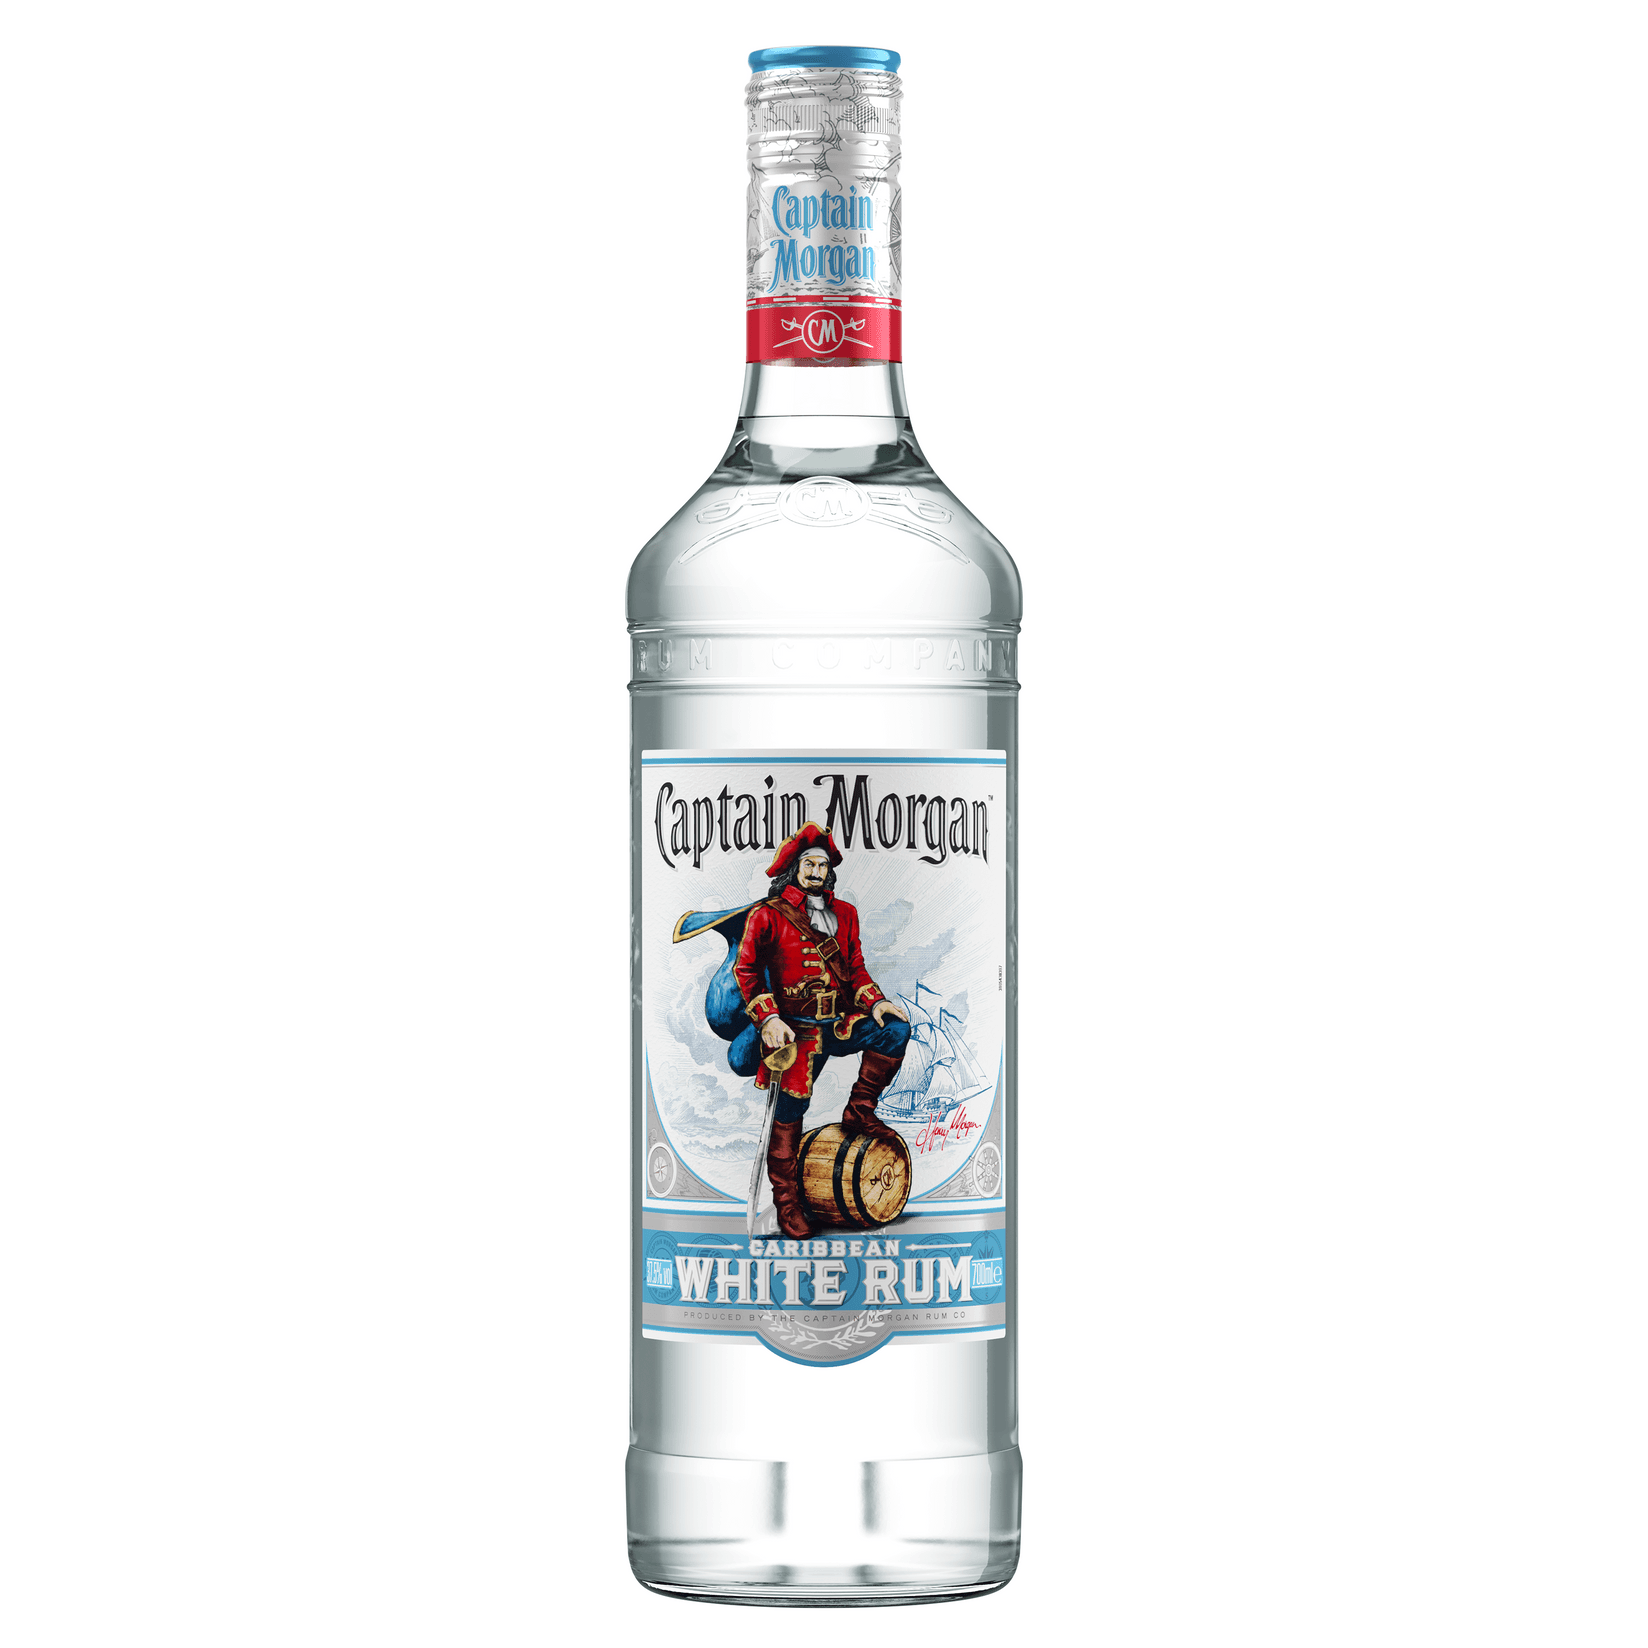 Selected image for CAPTAIN MORGAN White rum 0.7l